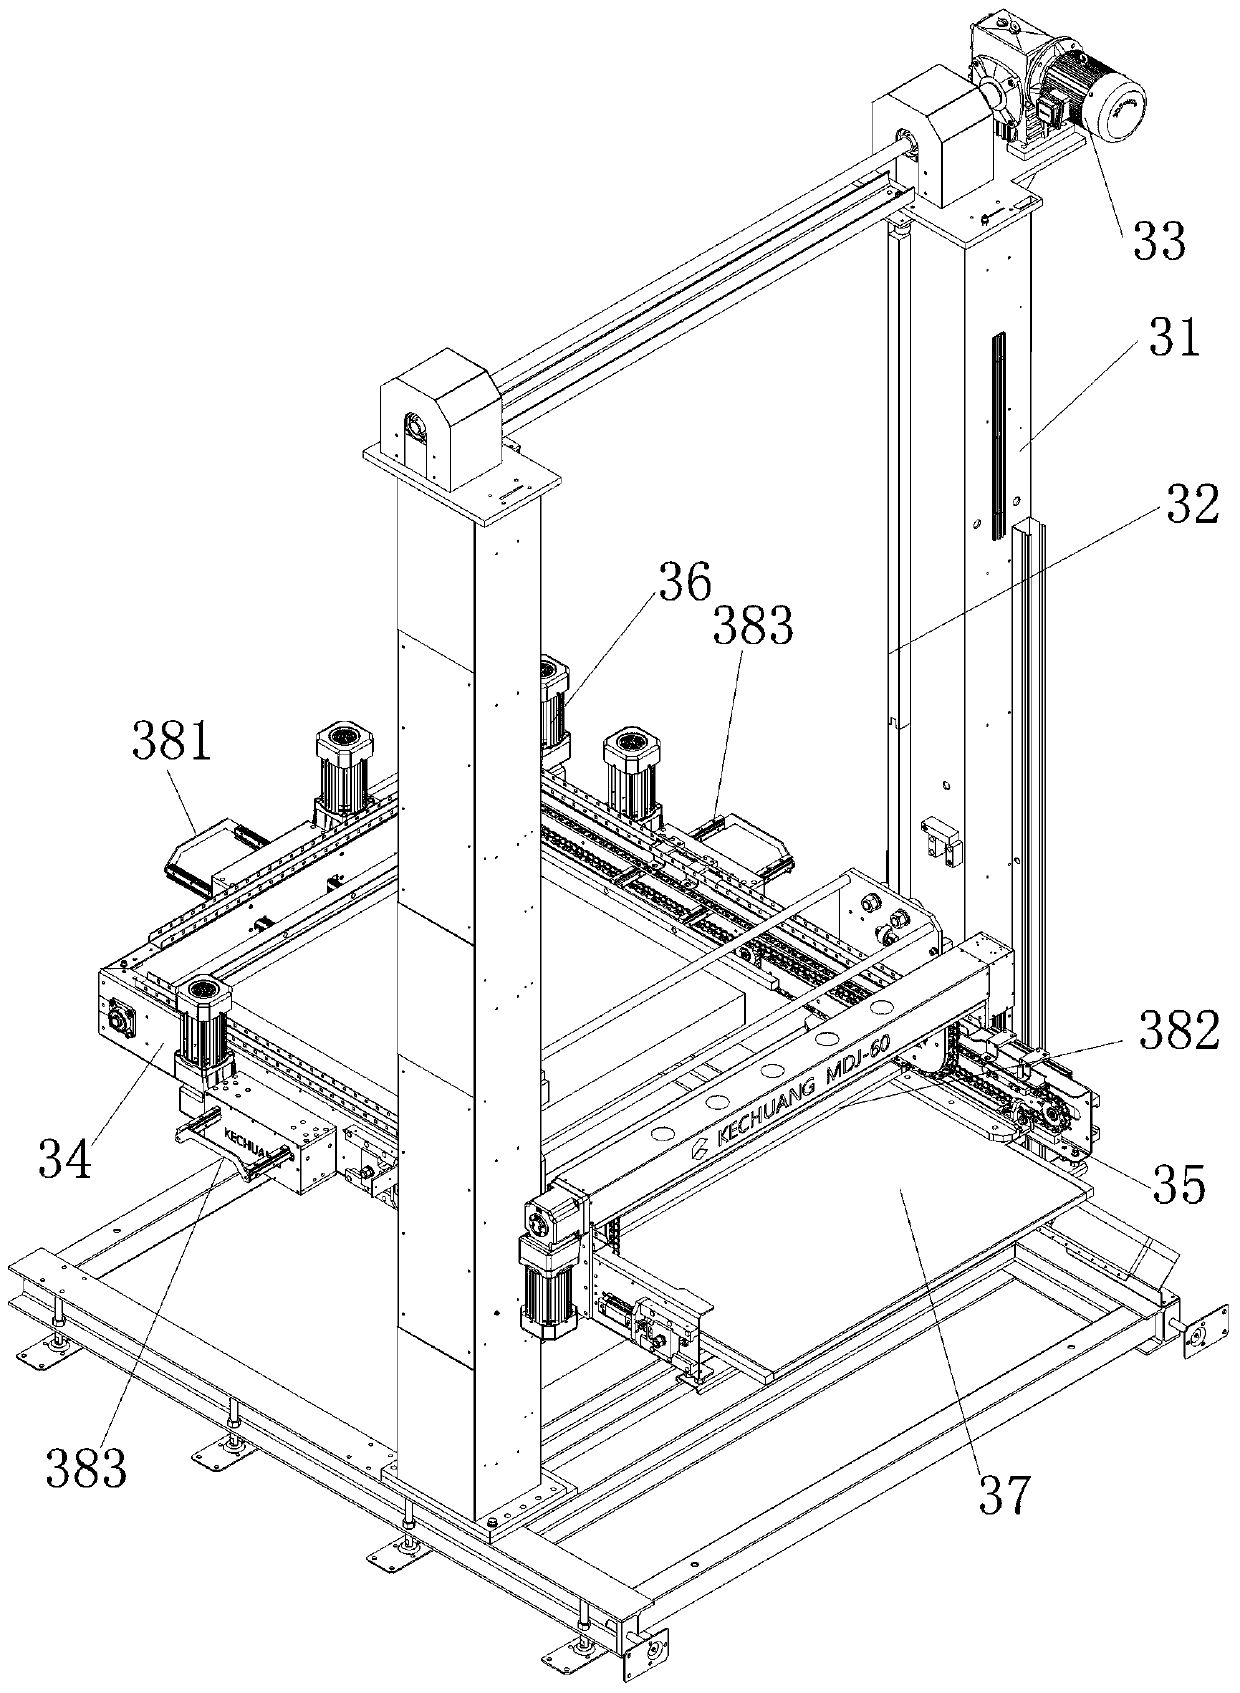 Automatic packaging box stacking machine capable of achieving selective stacking